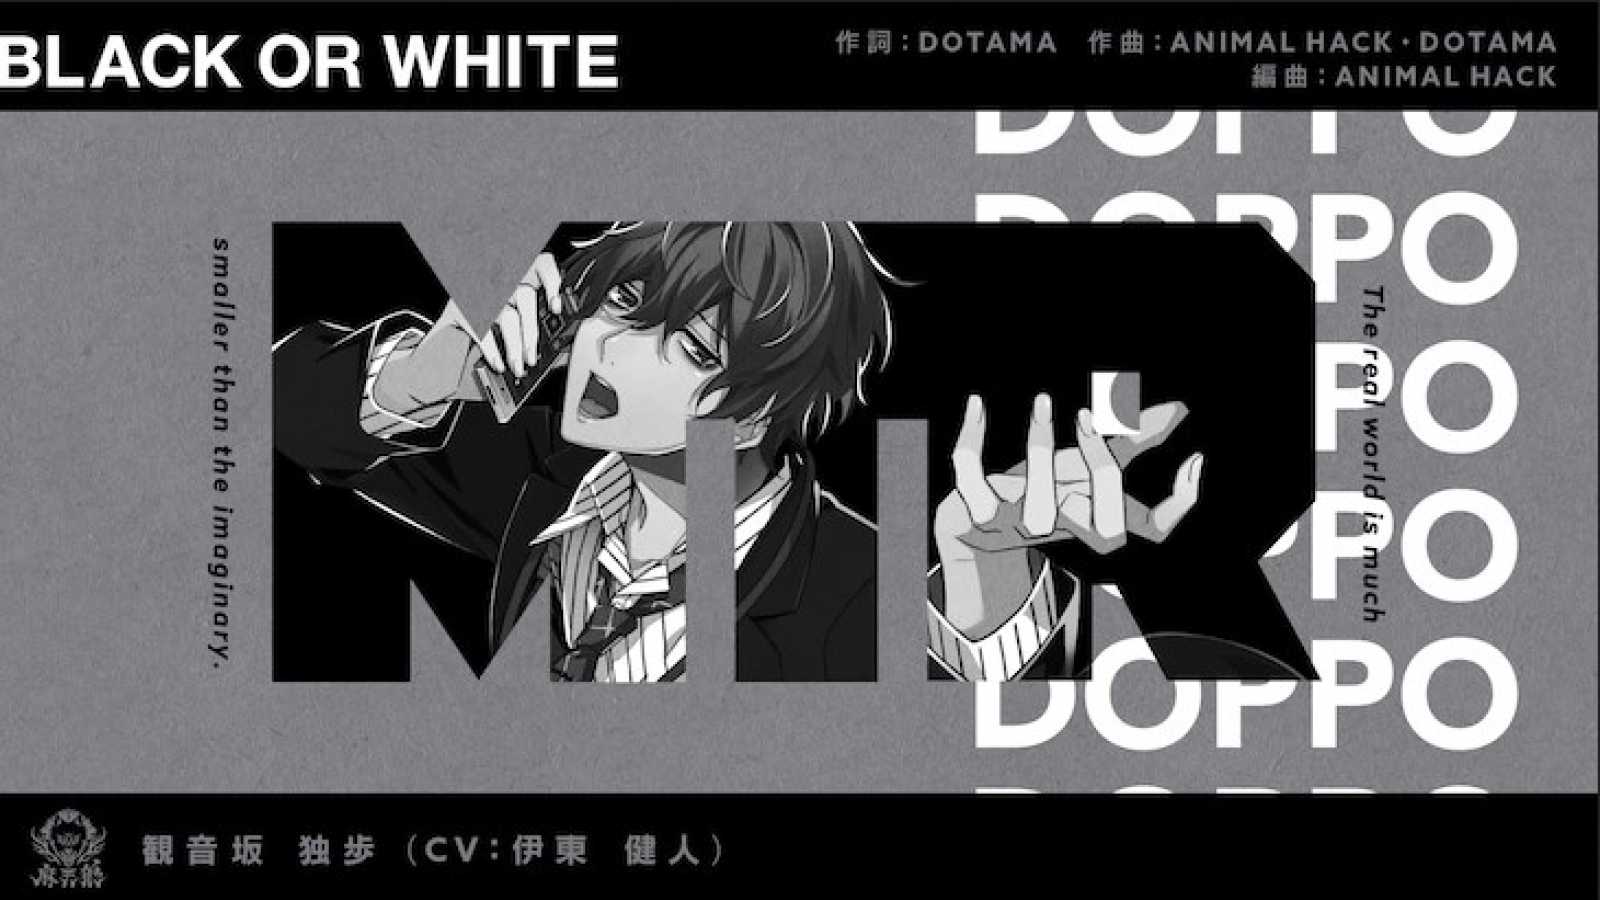 DOTAMA and ANIMAL HACK Produce New Solo Track for Hypnosis Mic's Doppo Kannonzaka © EVIL LINE RECORDS. All rights reserved.